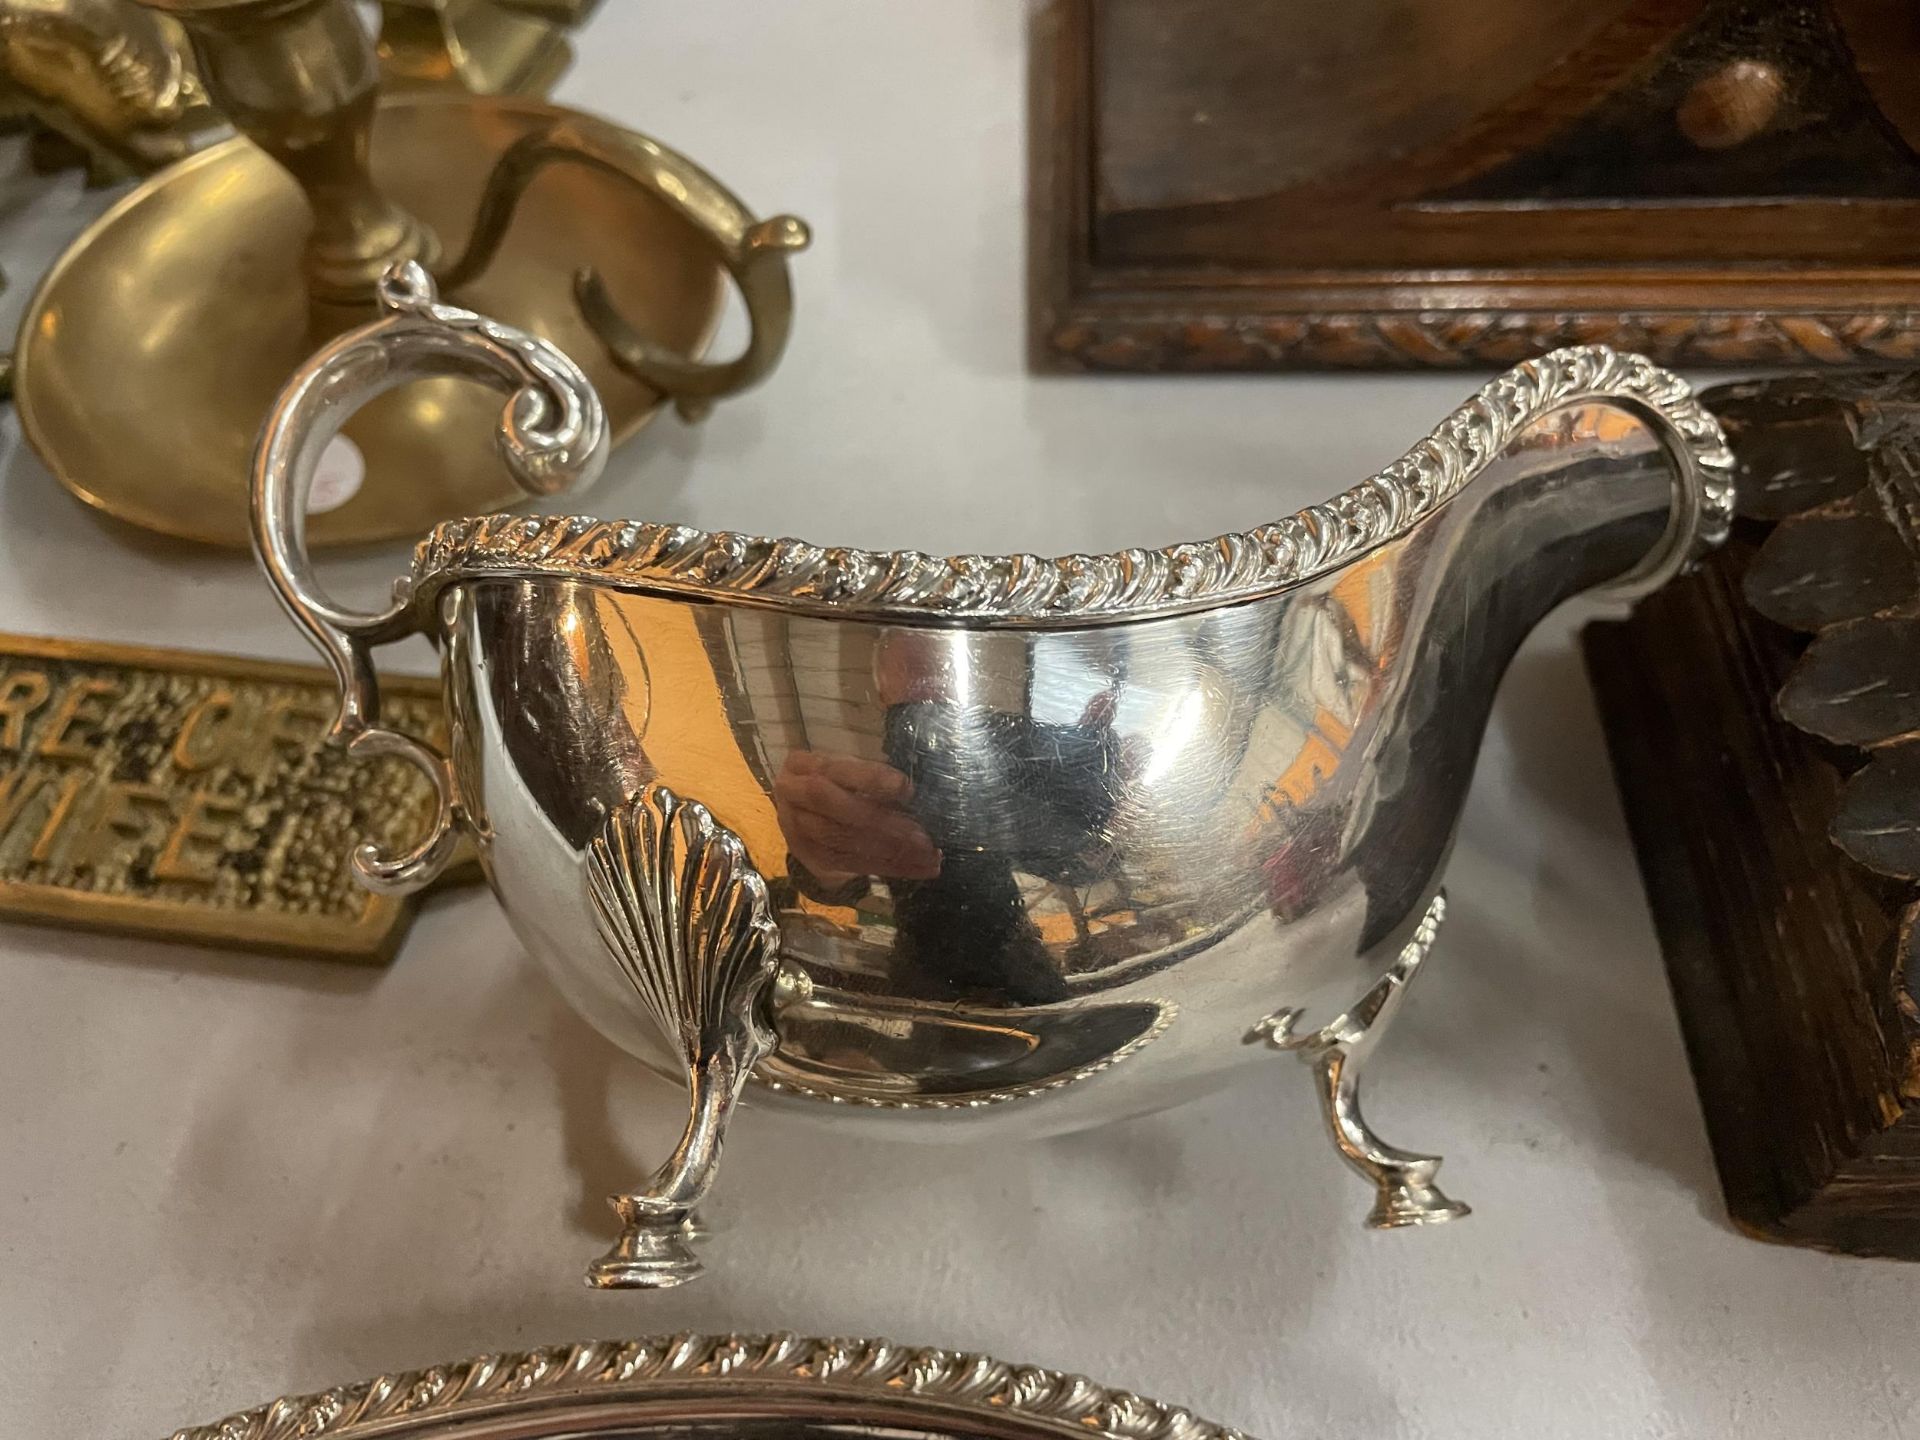 THREE PIECES OF SILVER PLATE TO INCLUDE A SAUCE BOAT, A SALVER AND A TWO HANDLED DISH WITH A GREEN - Image 3 of 4